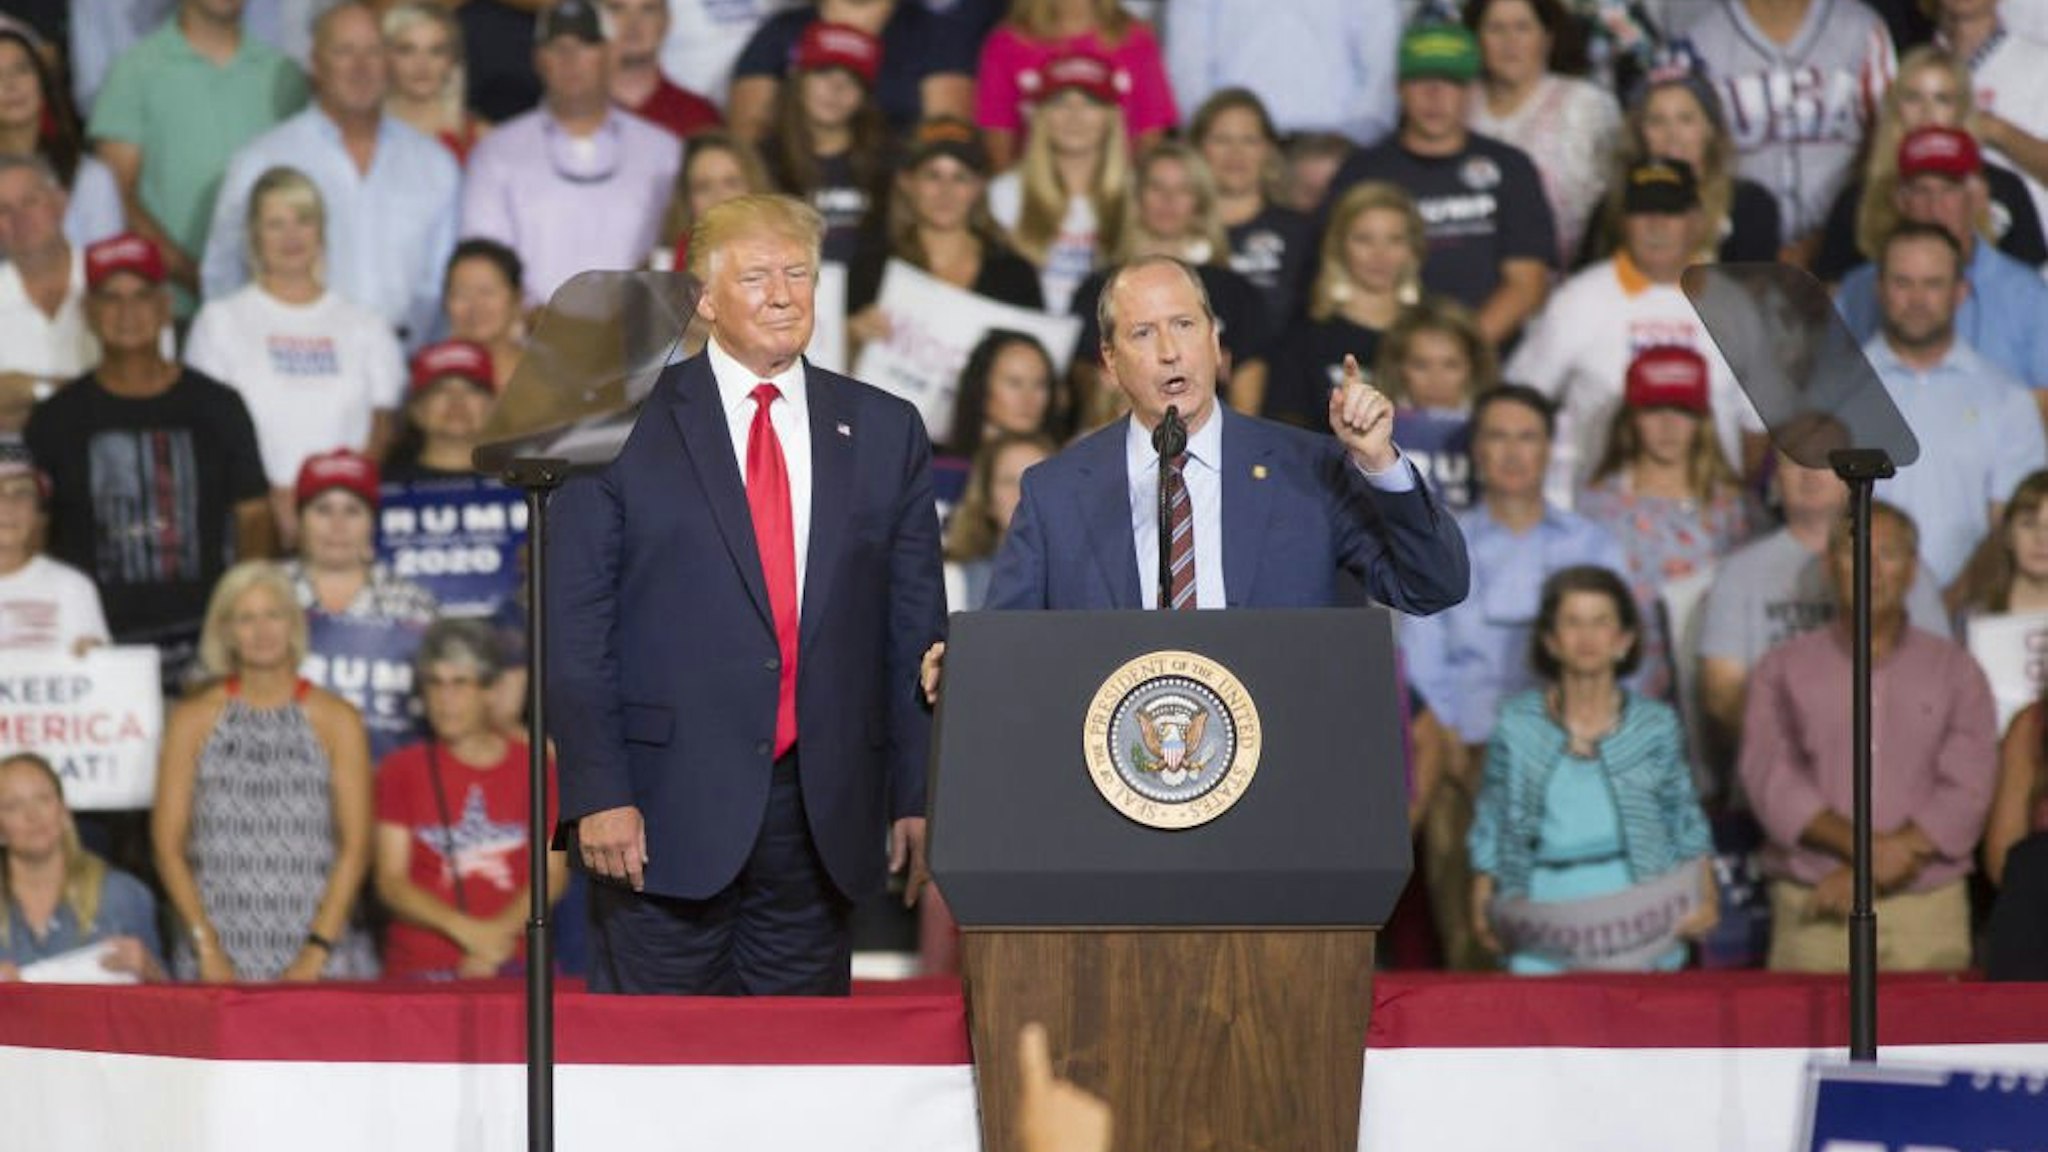 State Senator Dan Bishop, a Republican from North Carolina, speaks during a rally with U.S. President Donald Trump, left, in Greenville, North Carolina, U.S., on Wednesday, July 17, 2019.